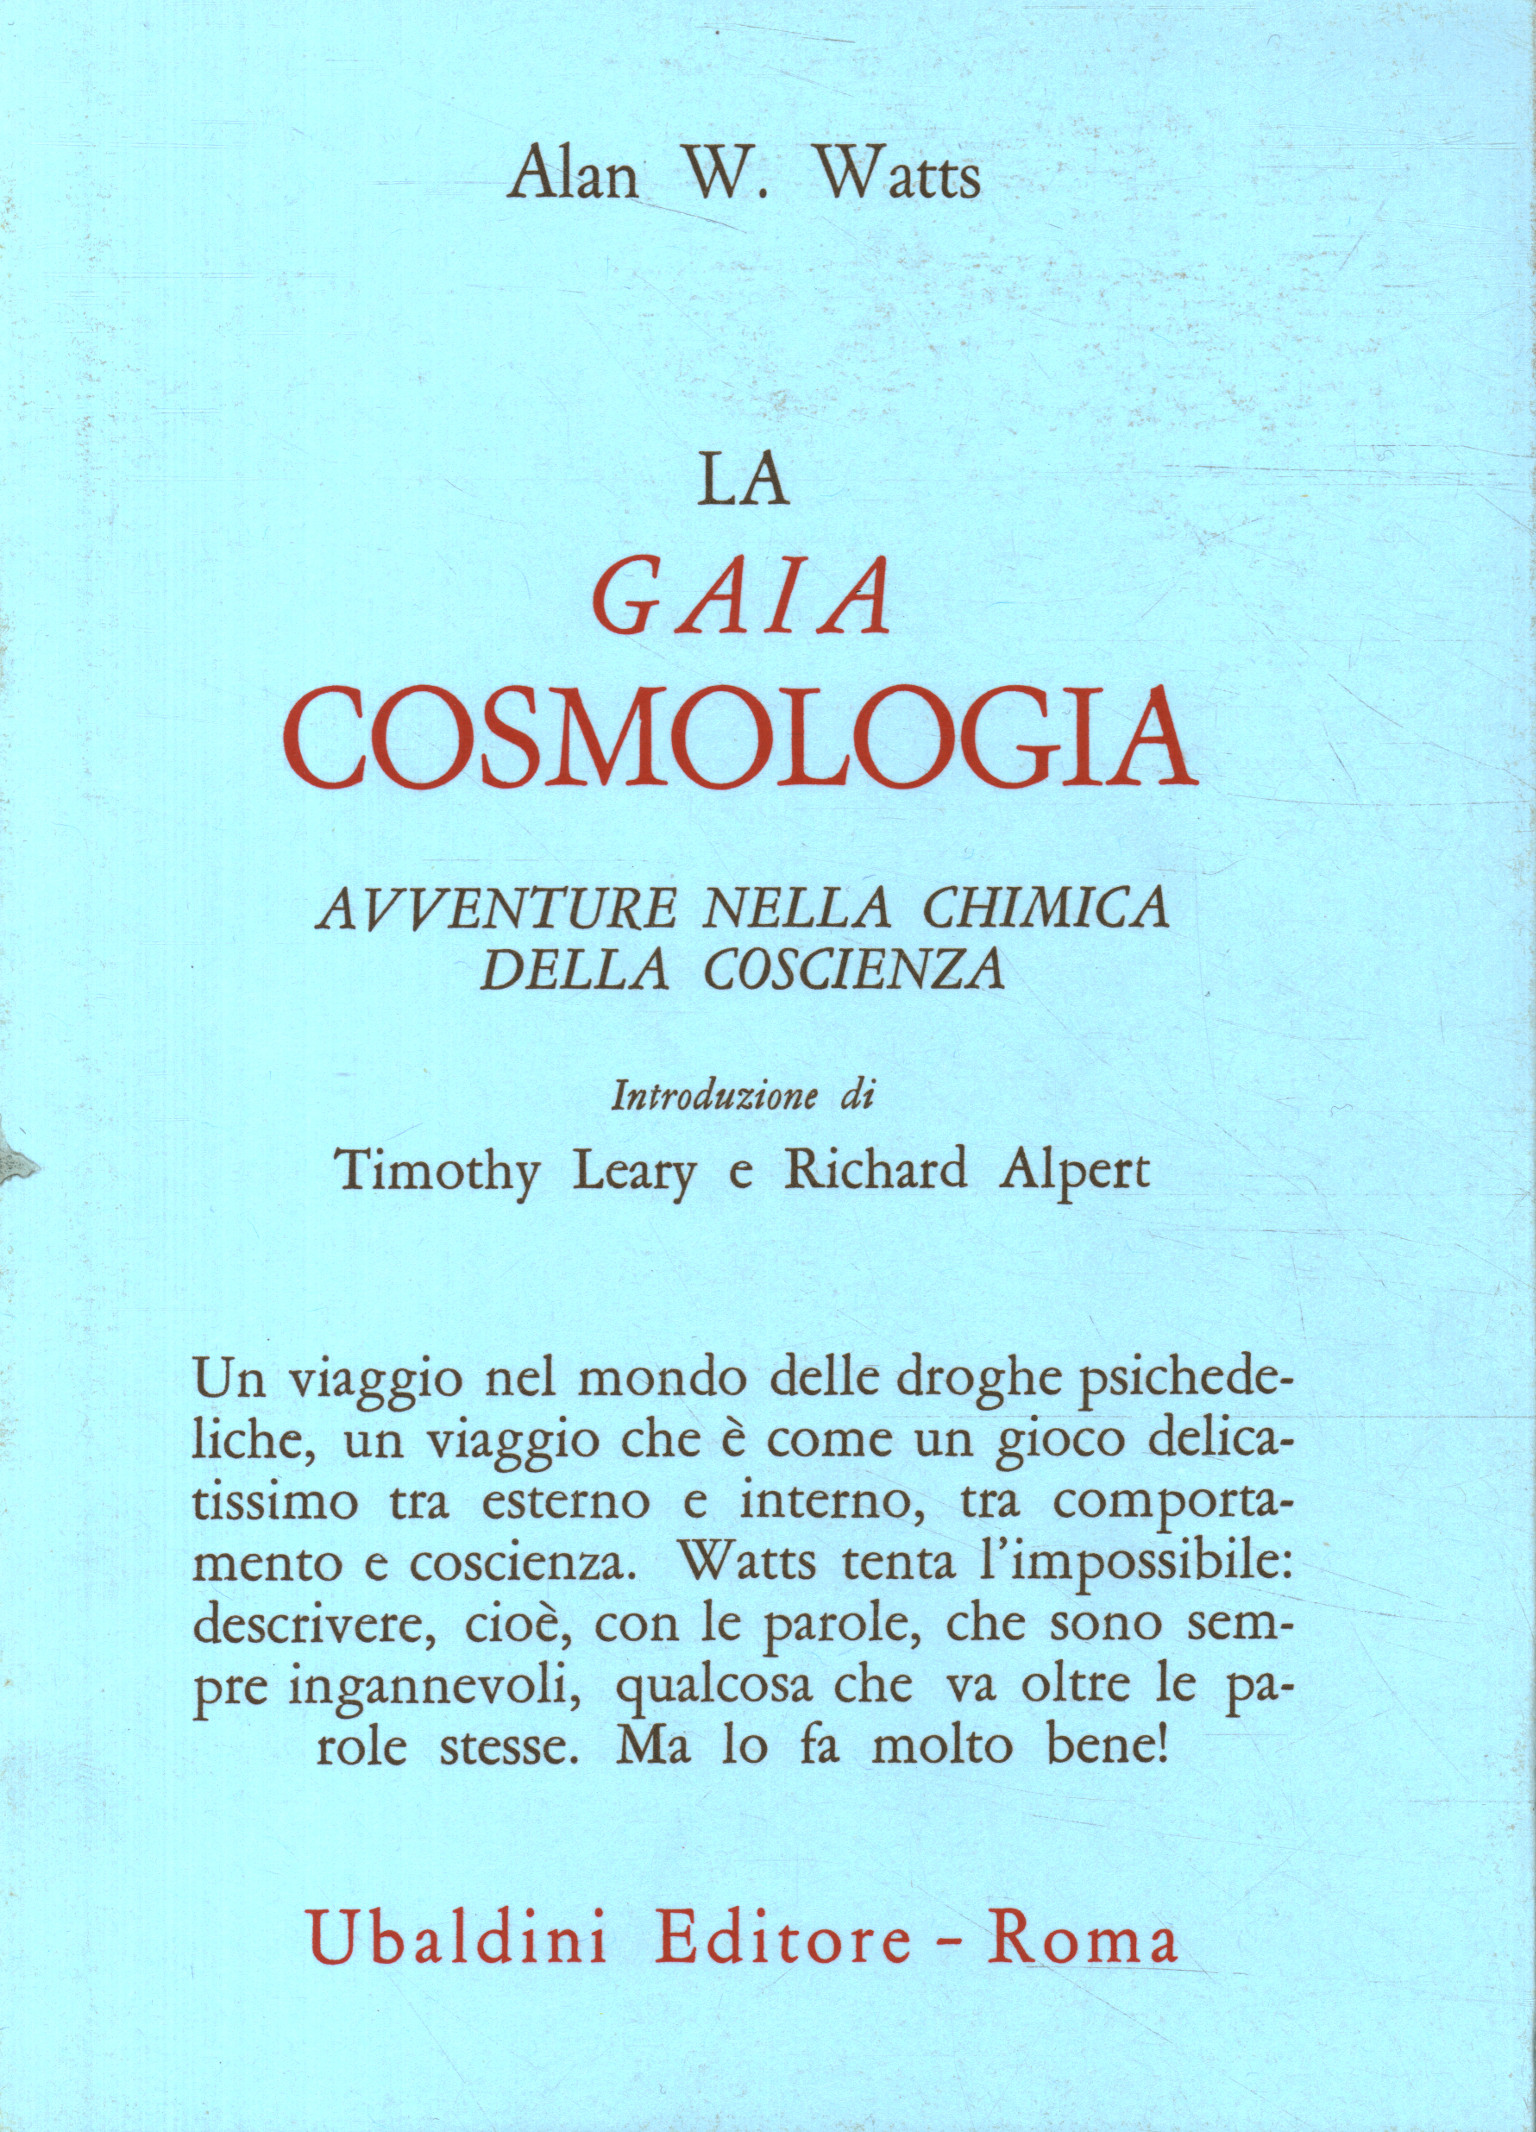 The gay cosmology